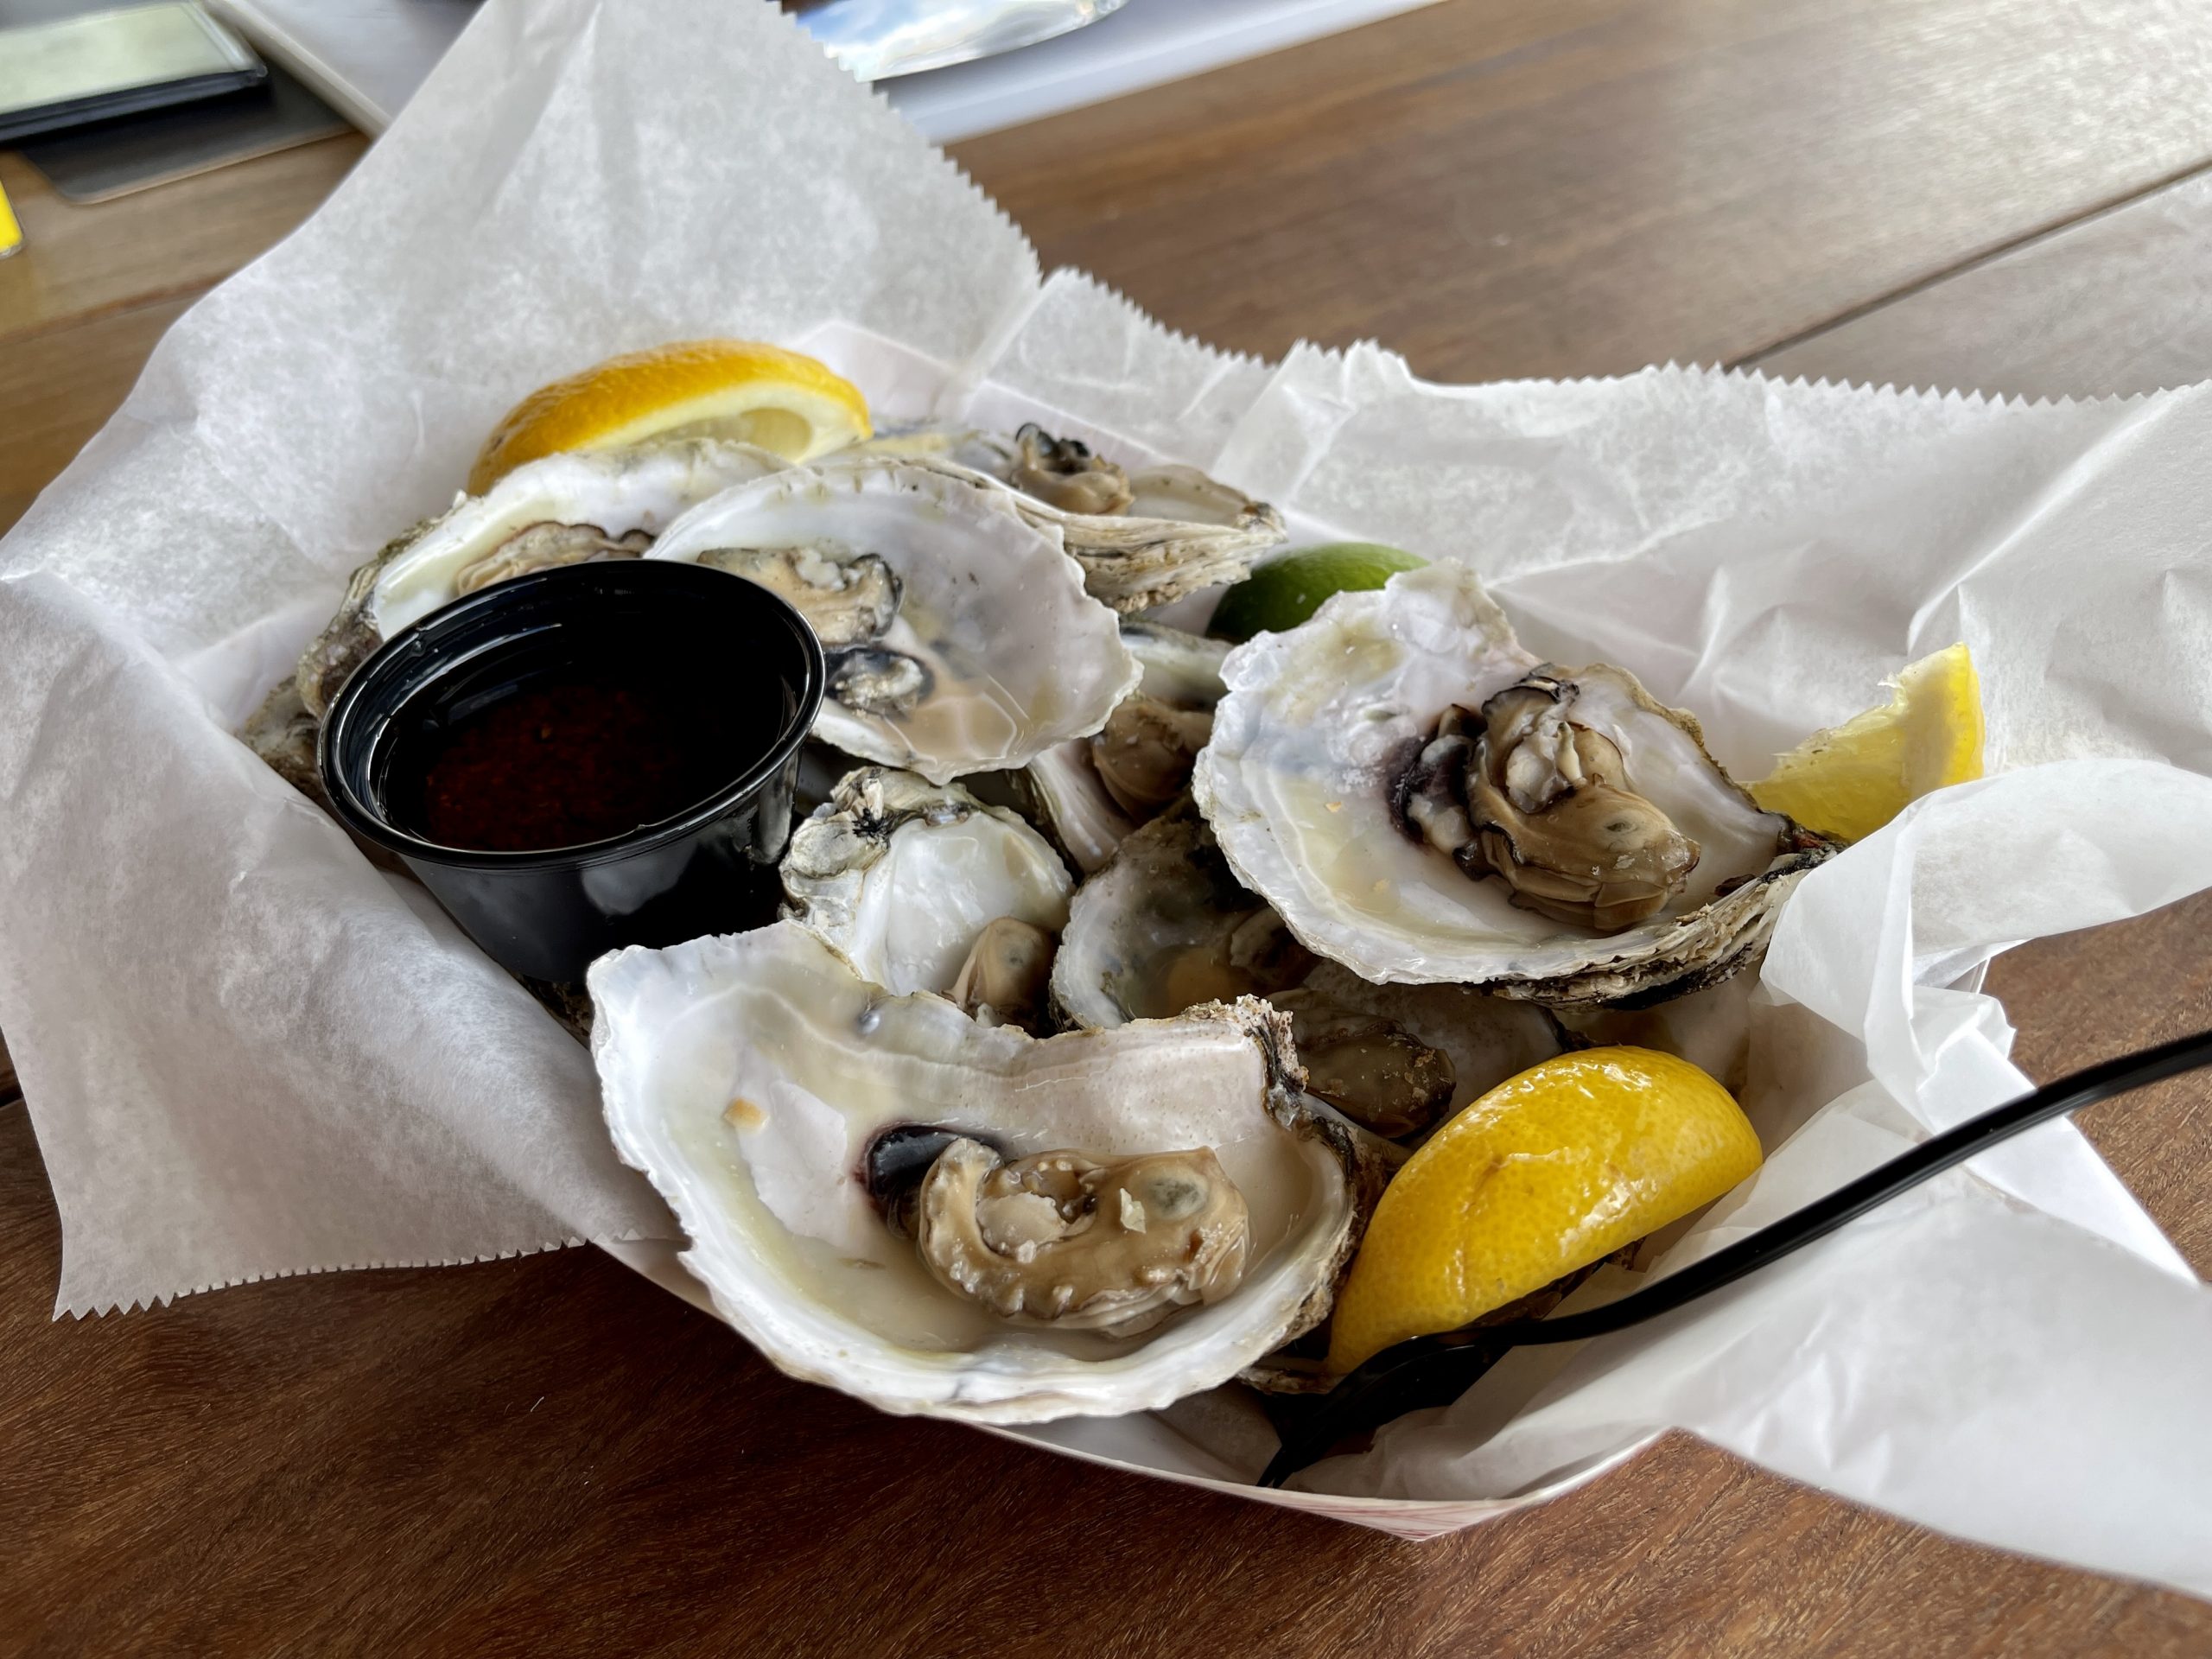 Steamed_Oysters